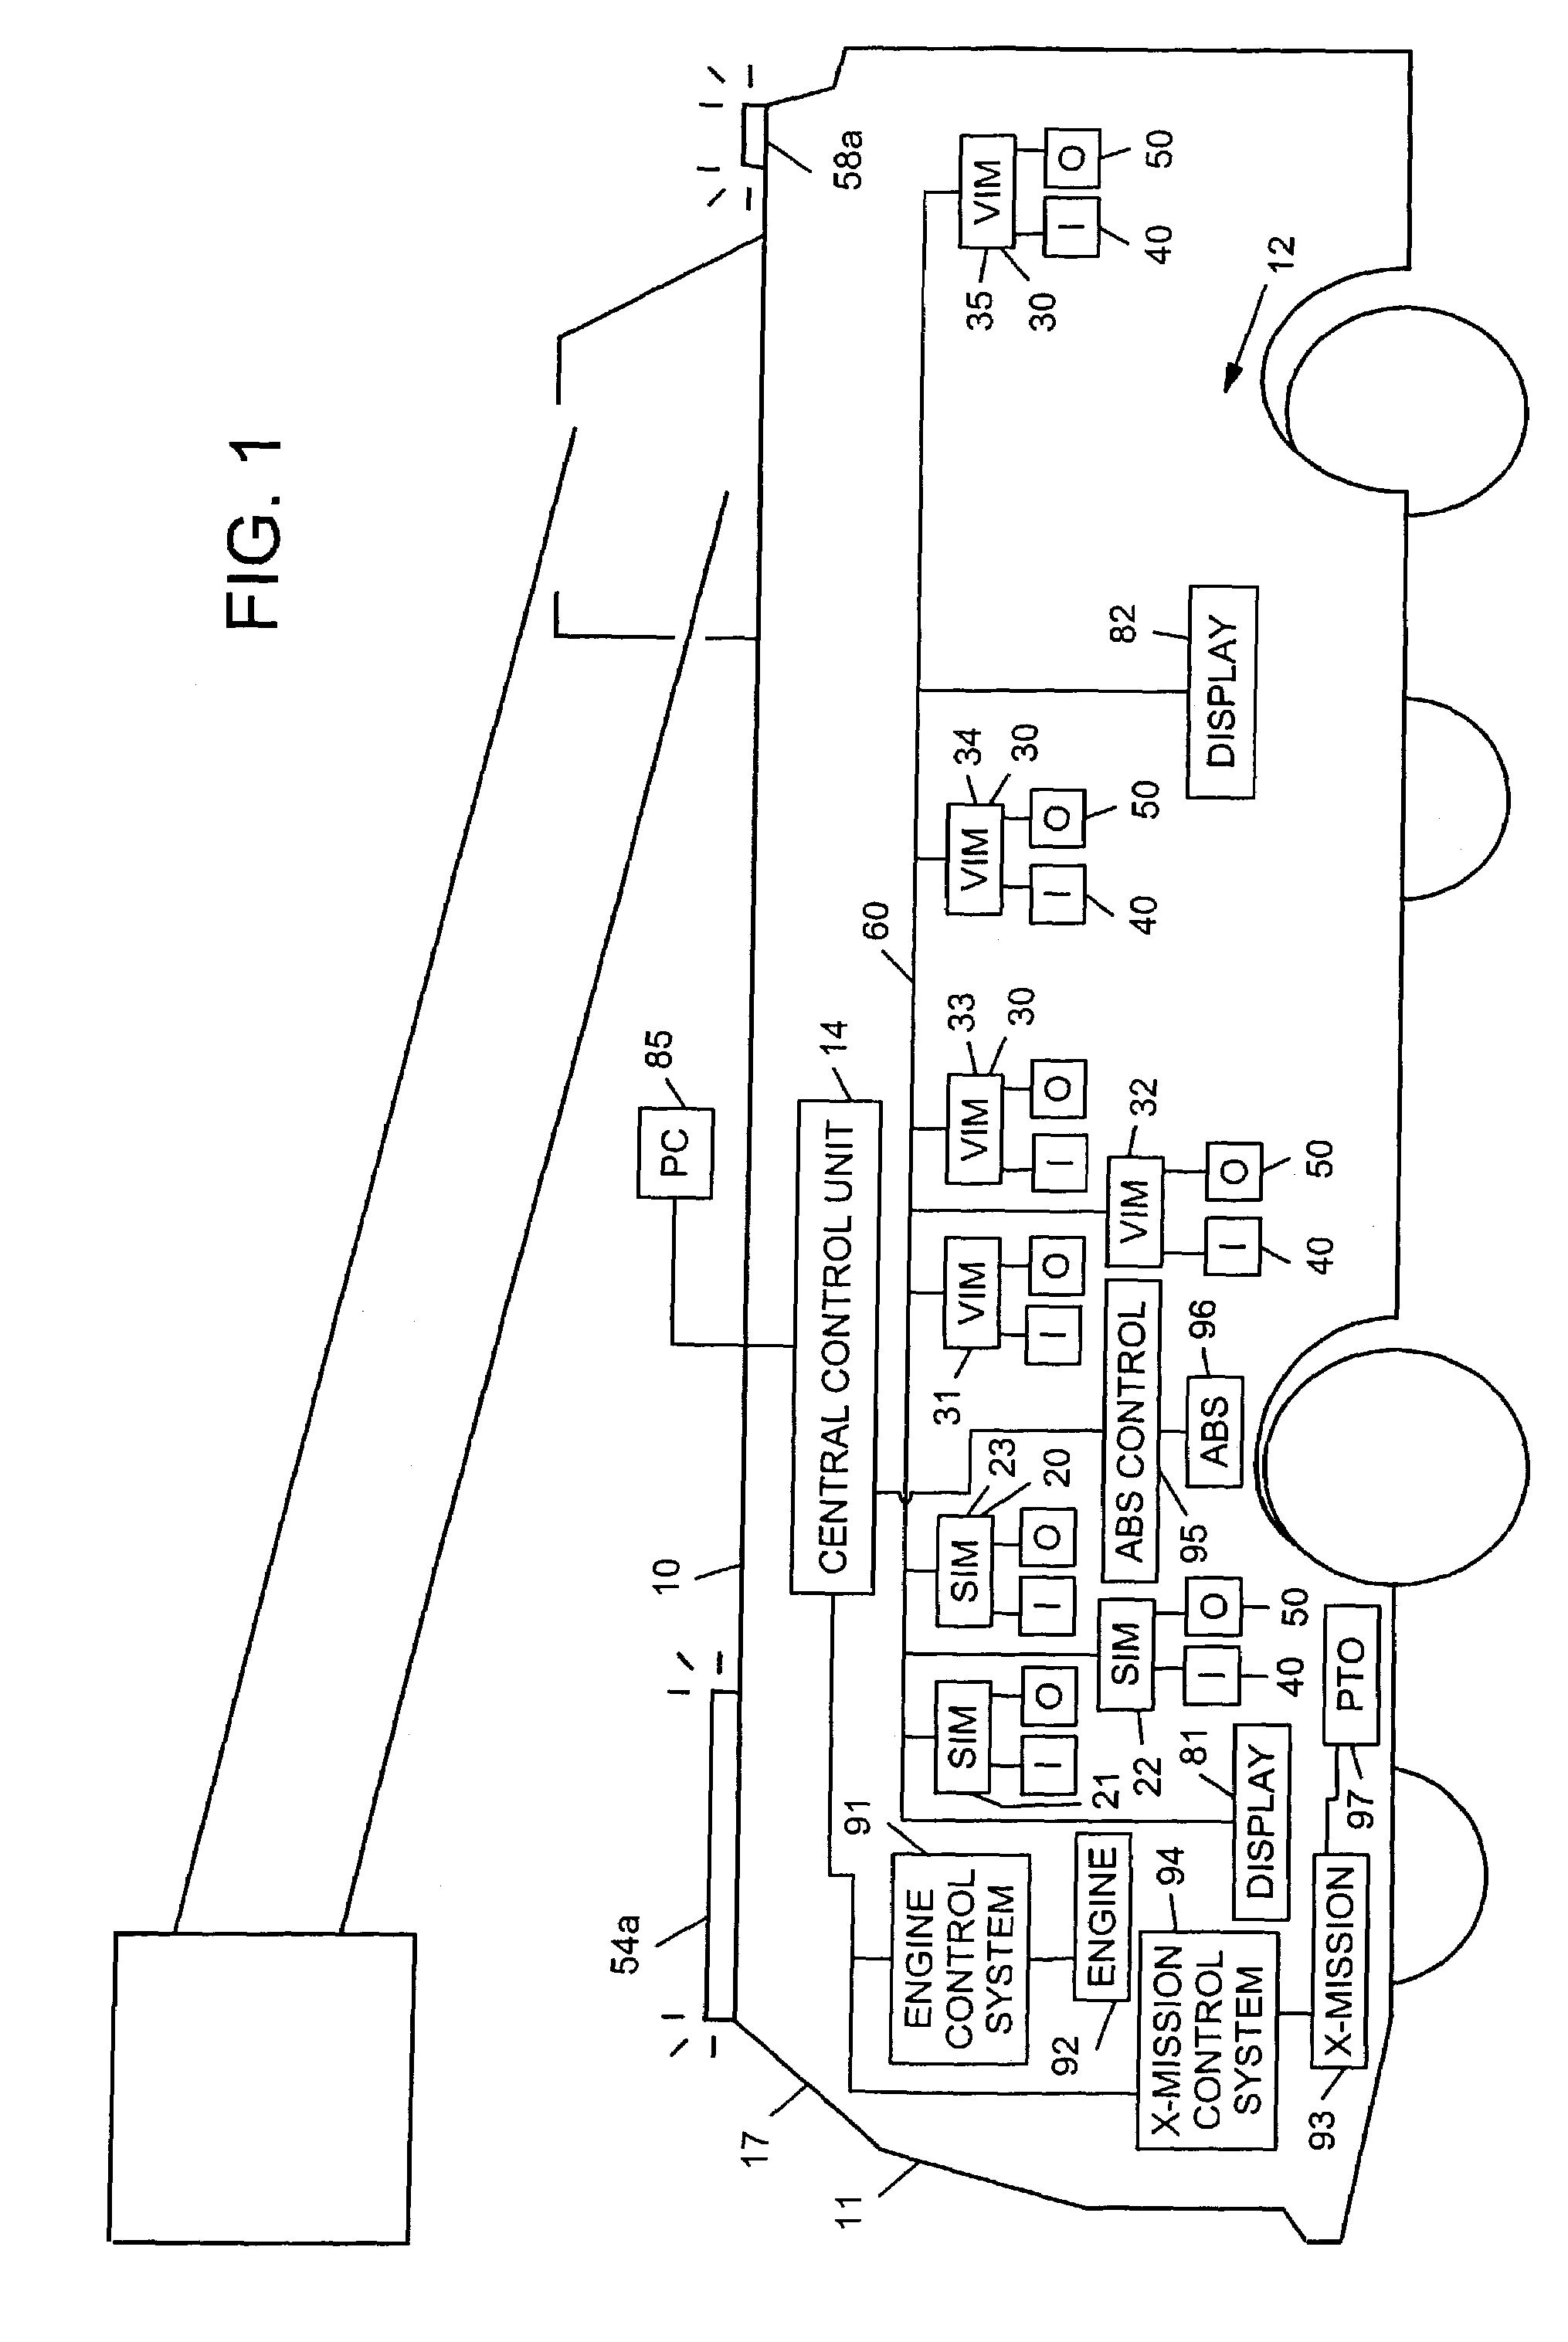 Equipment service vehicle with remote monitoring